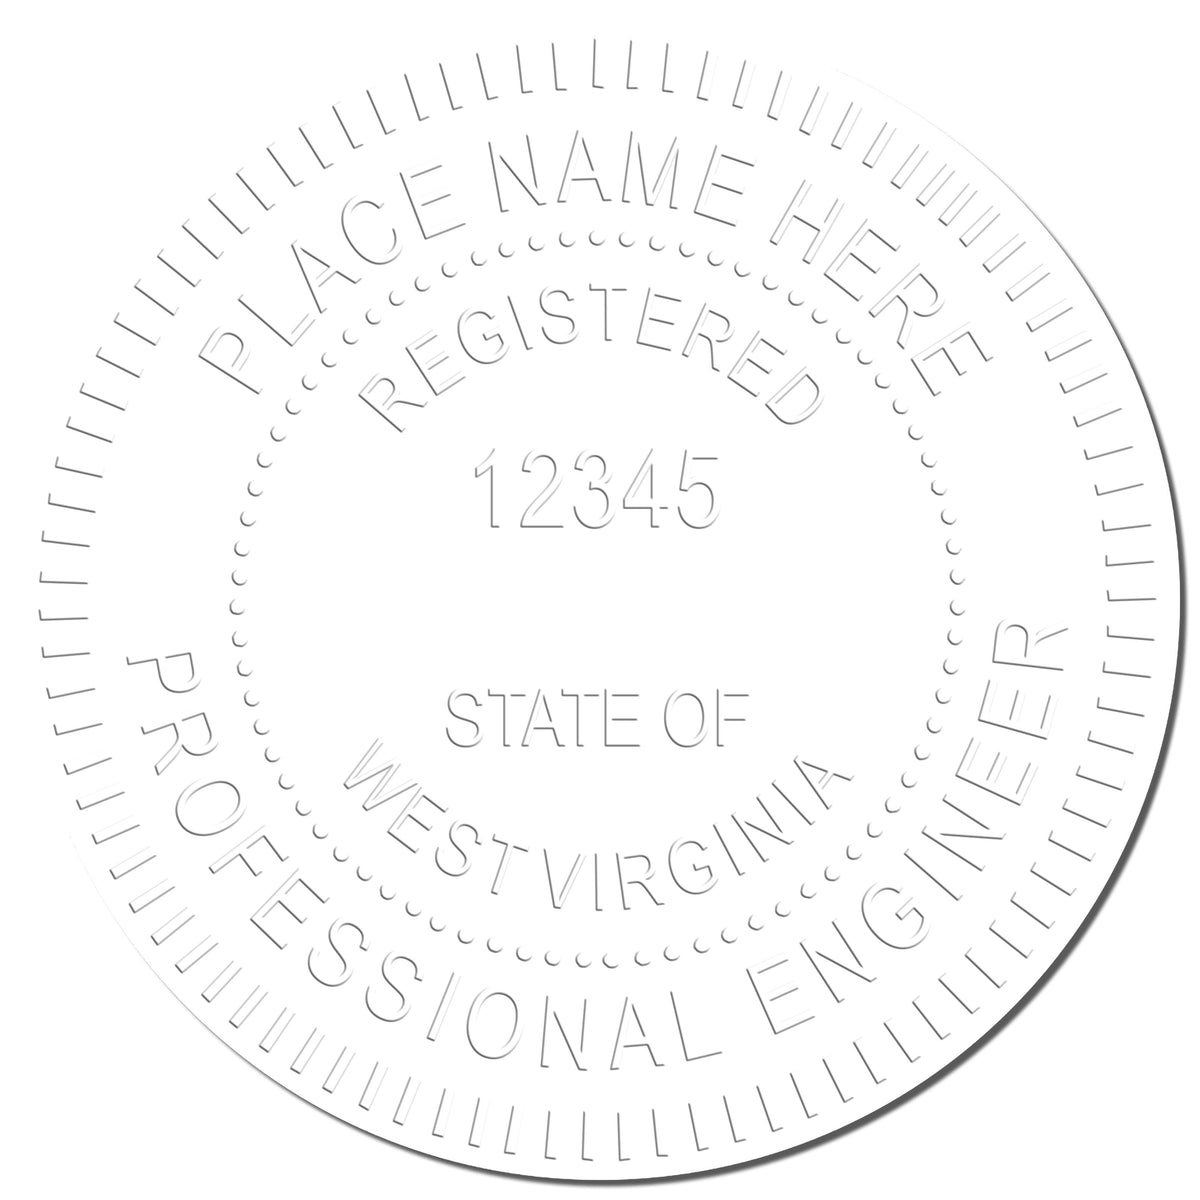 The Long Reach West Virginia PE Seal stamp impression comes to life with a crisp, detailed photo on paper - showcasing true professional quality.